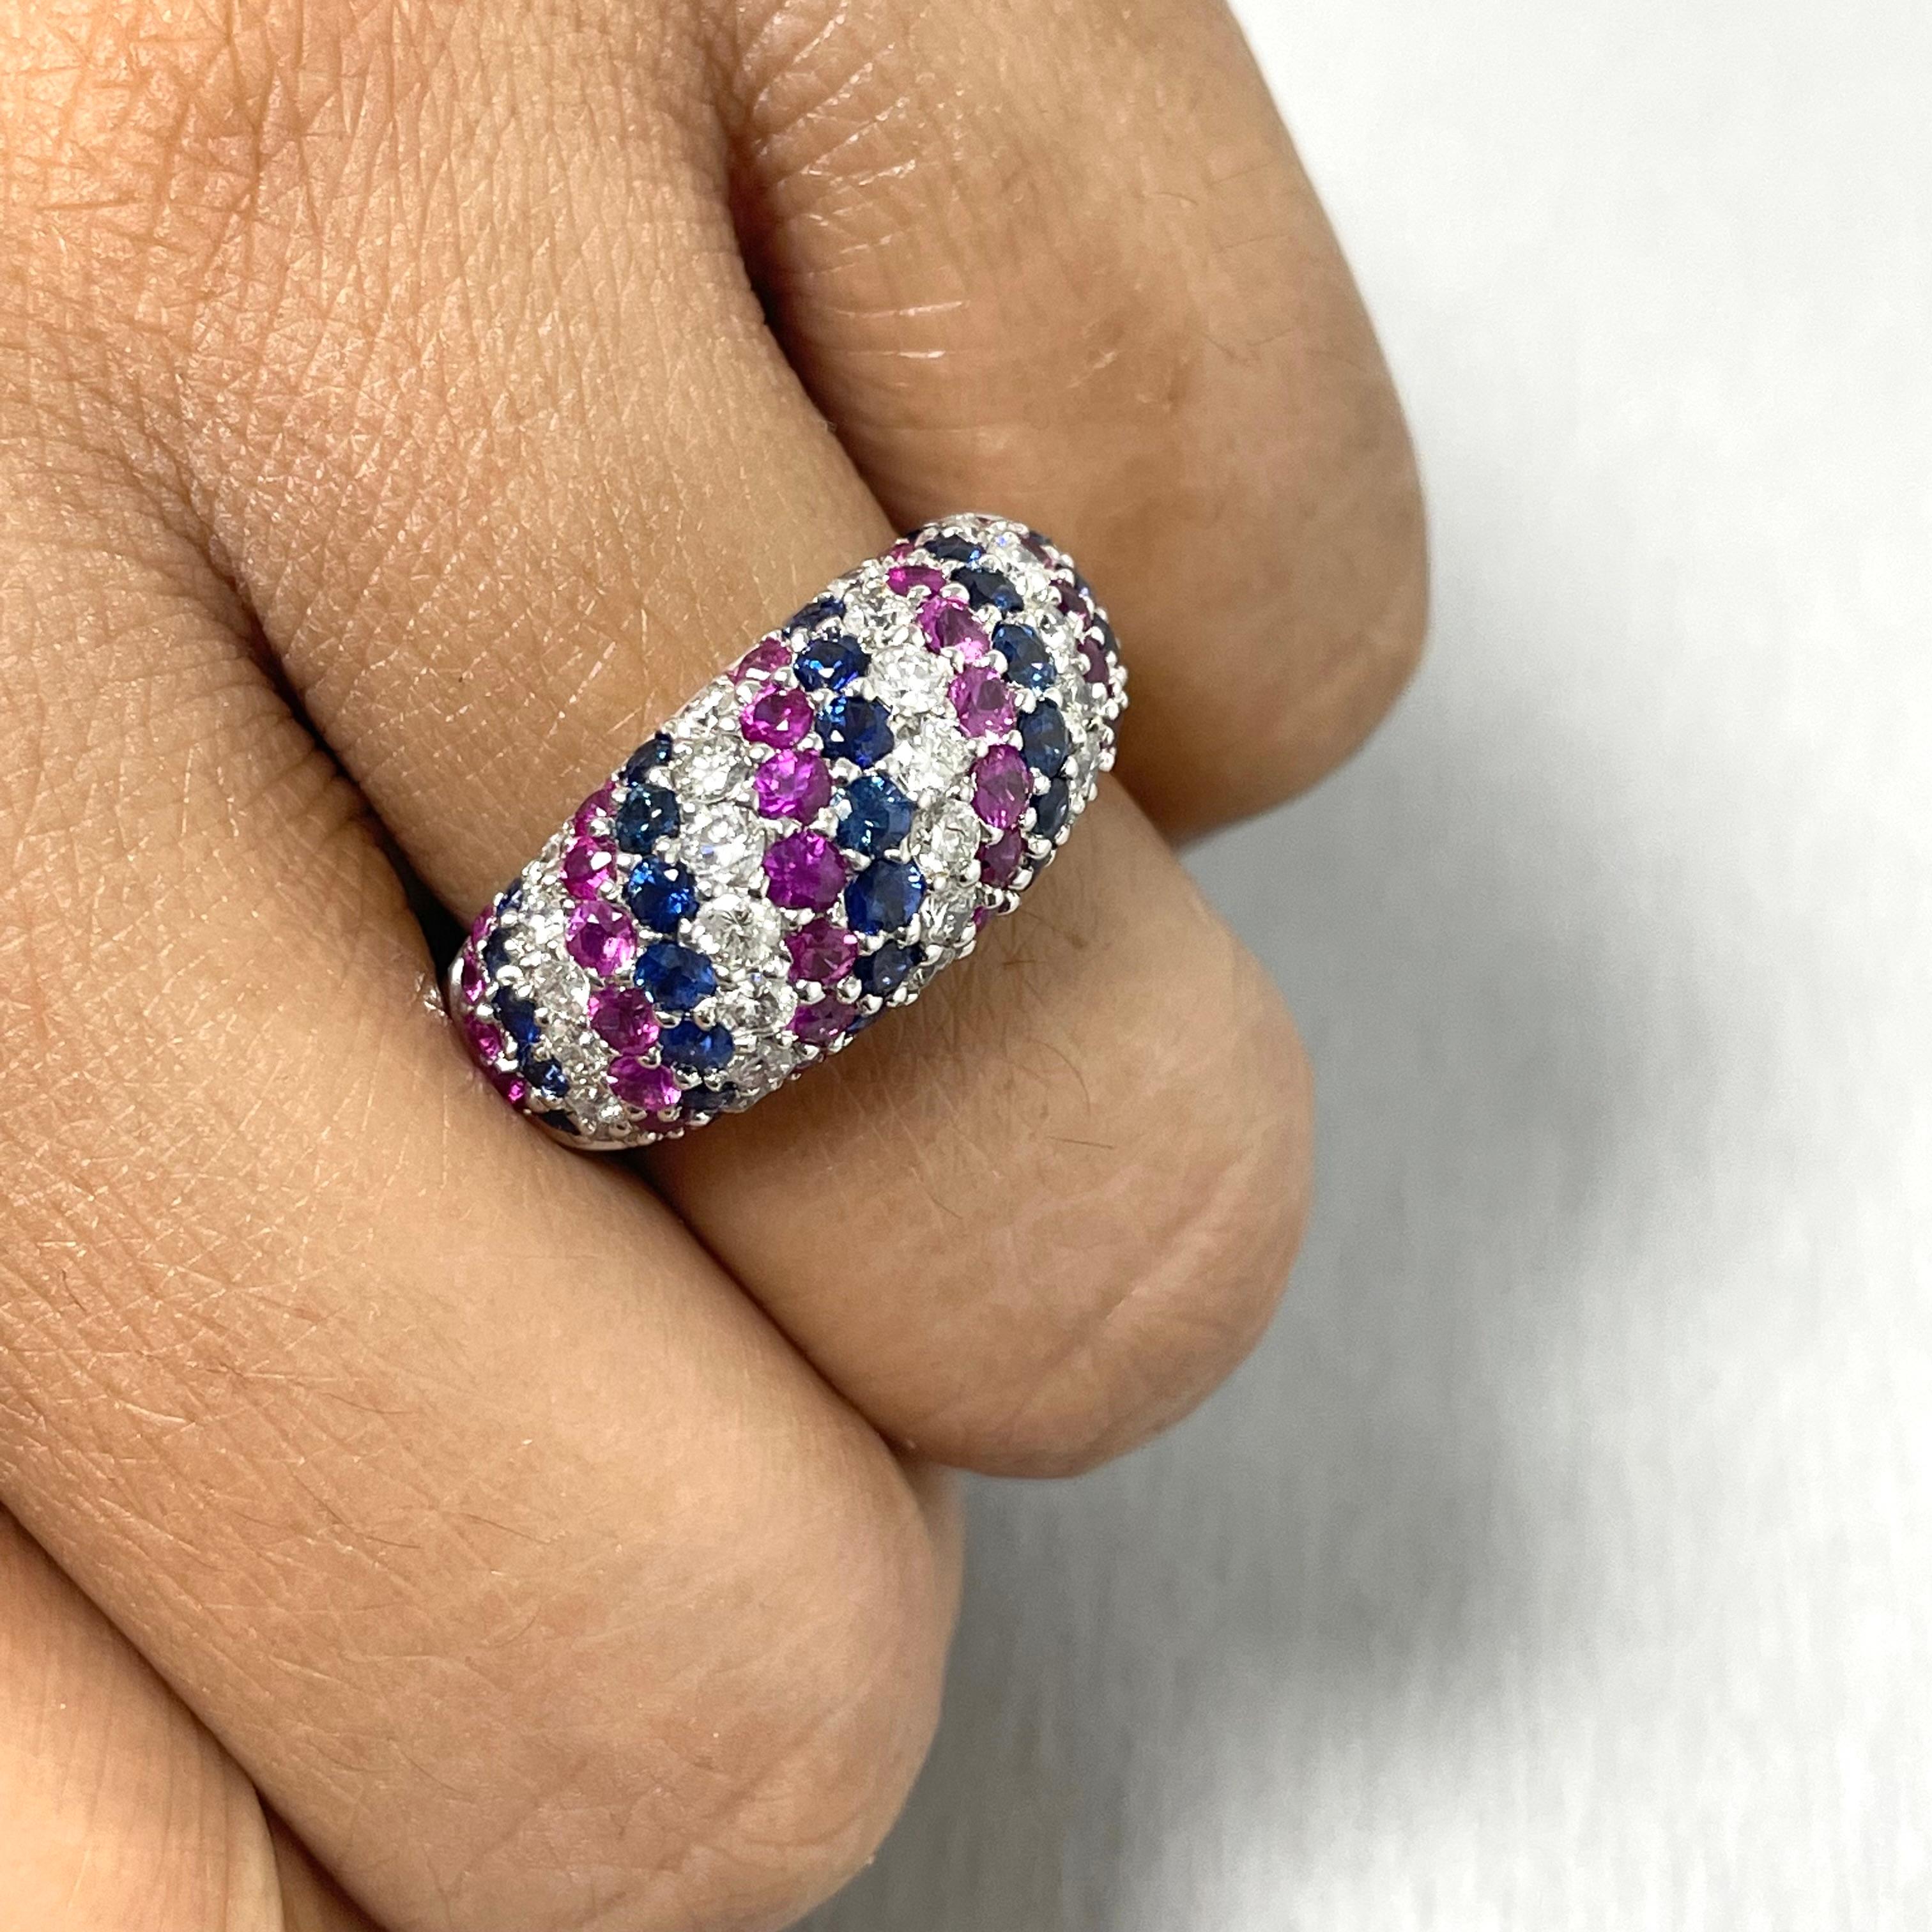 The Cynthia is a gorgeous, youthful colorful bubble band that makes a statement with its colors and boldness. With blue sapphires, pink rubies and stunning white diamonds, this band is everything one can ask for.

Total Diamond Weight: 0.88 ct